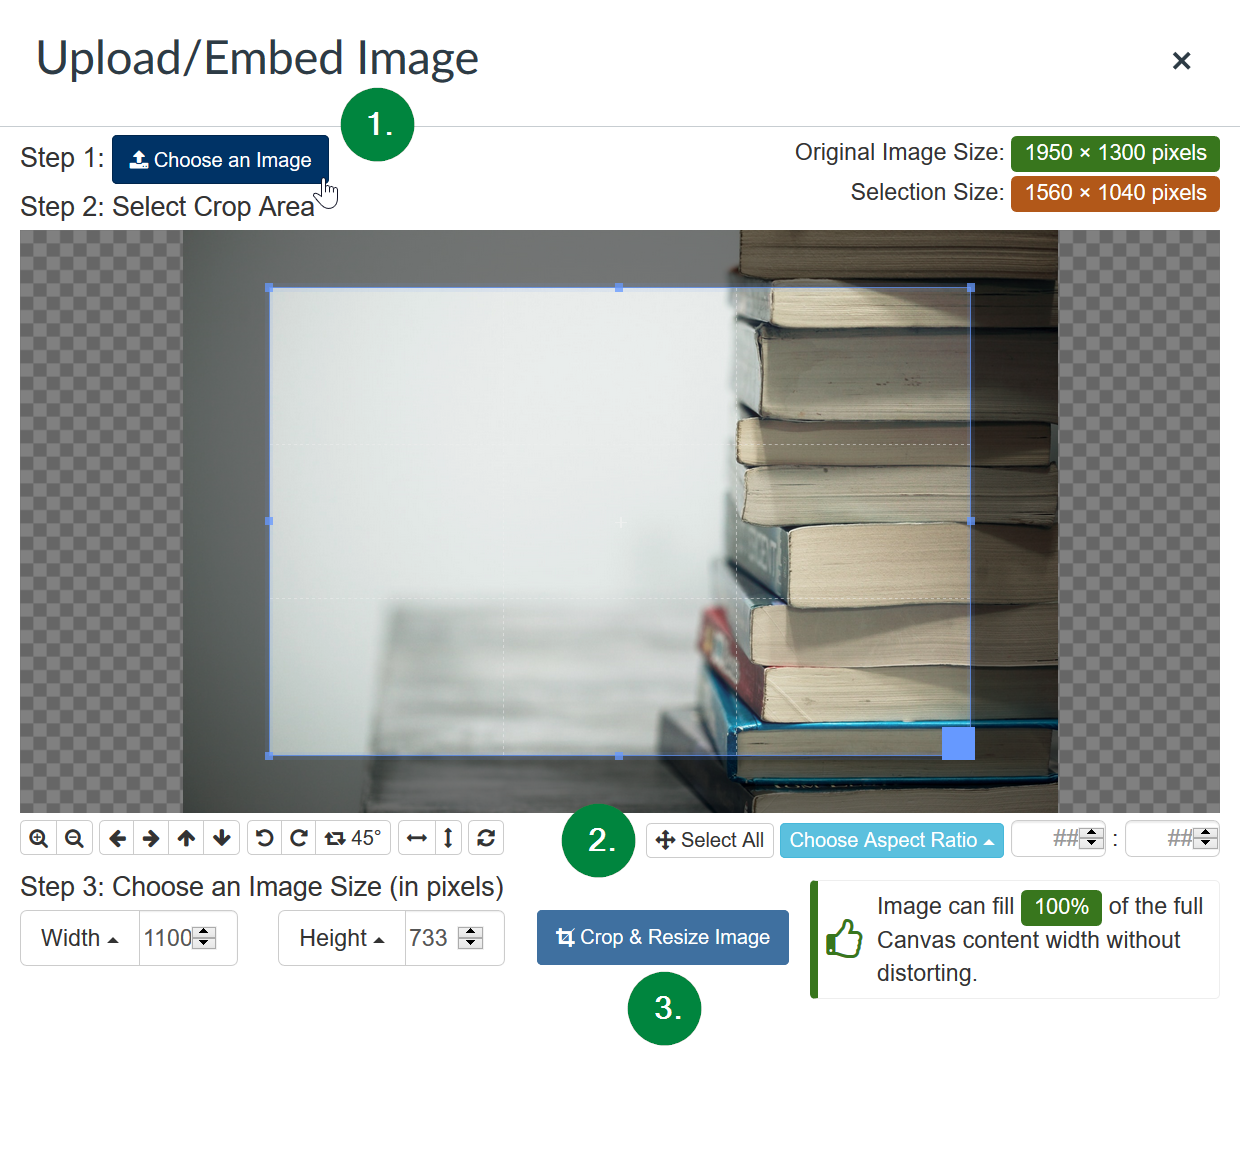 Screen capture showing the Upload/Embed Image pop-up window in Canvas.